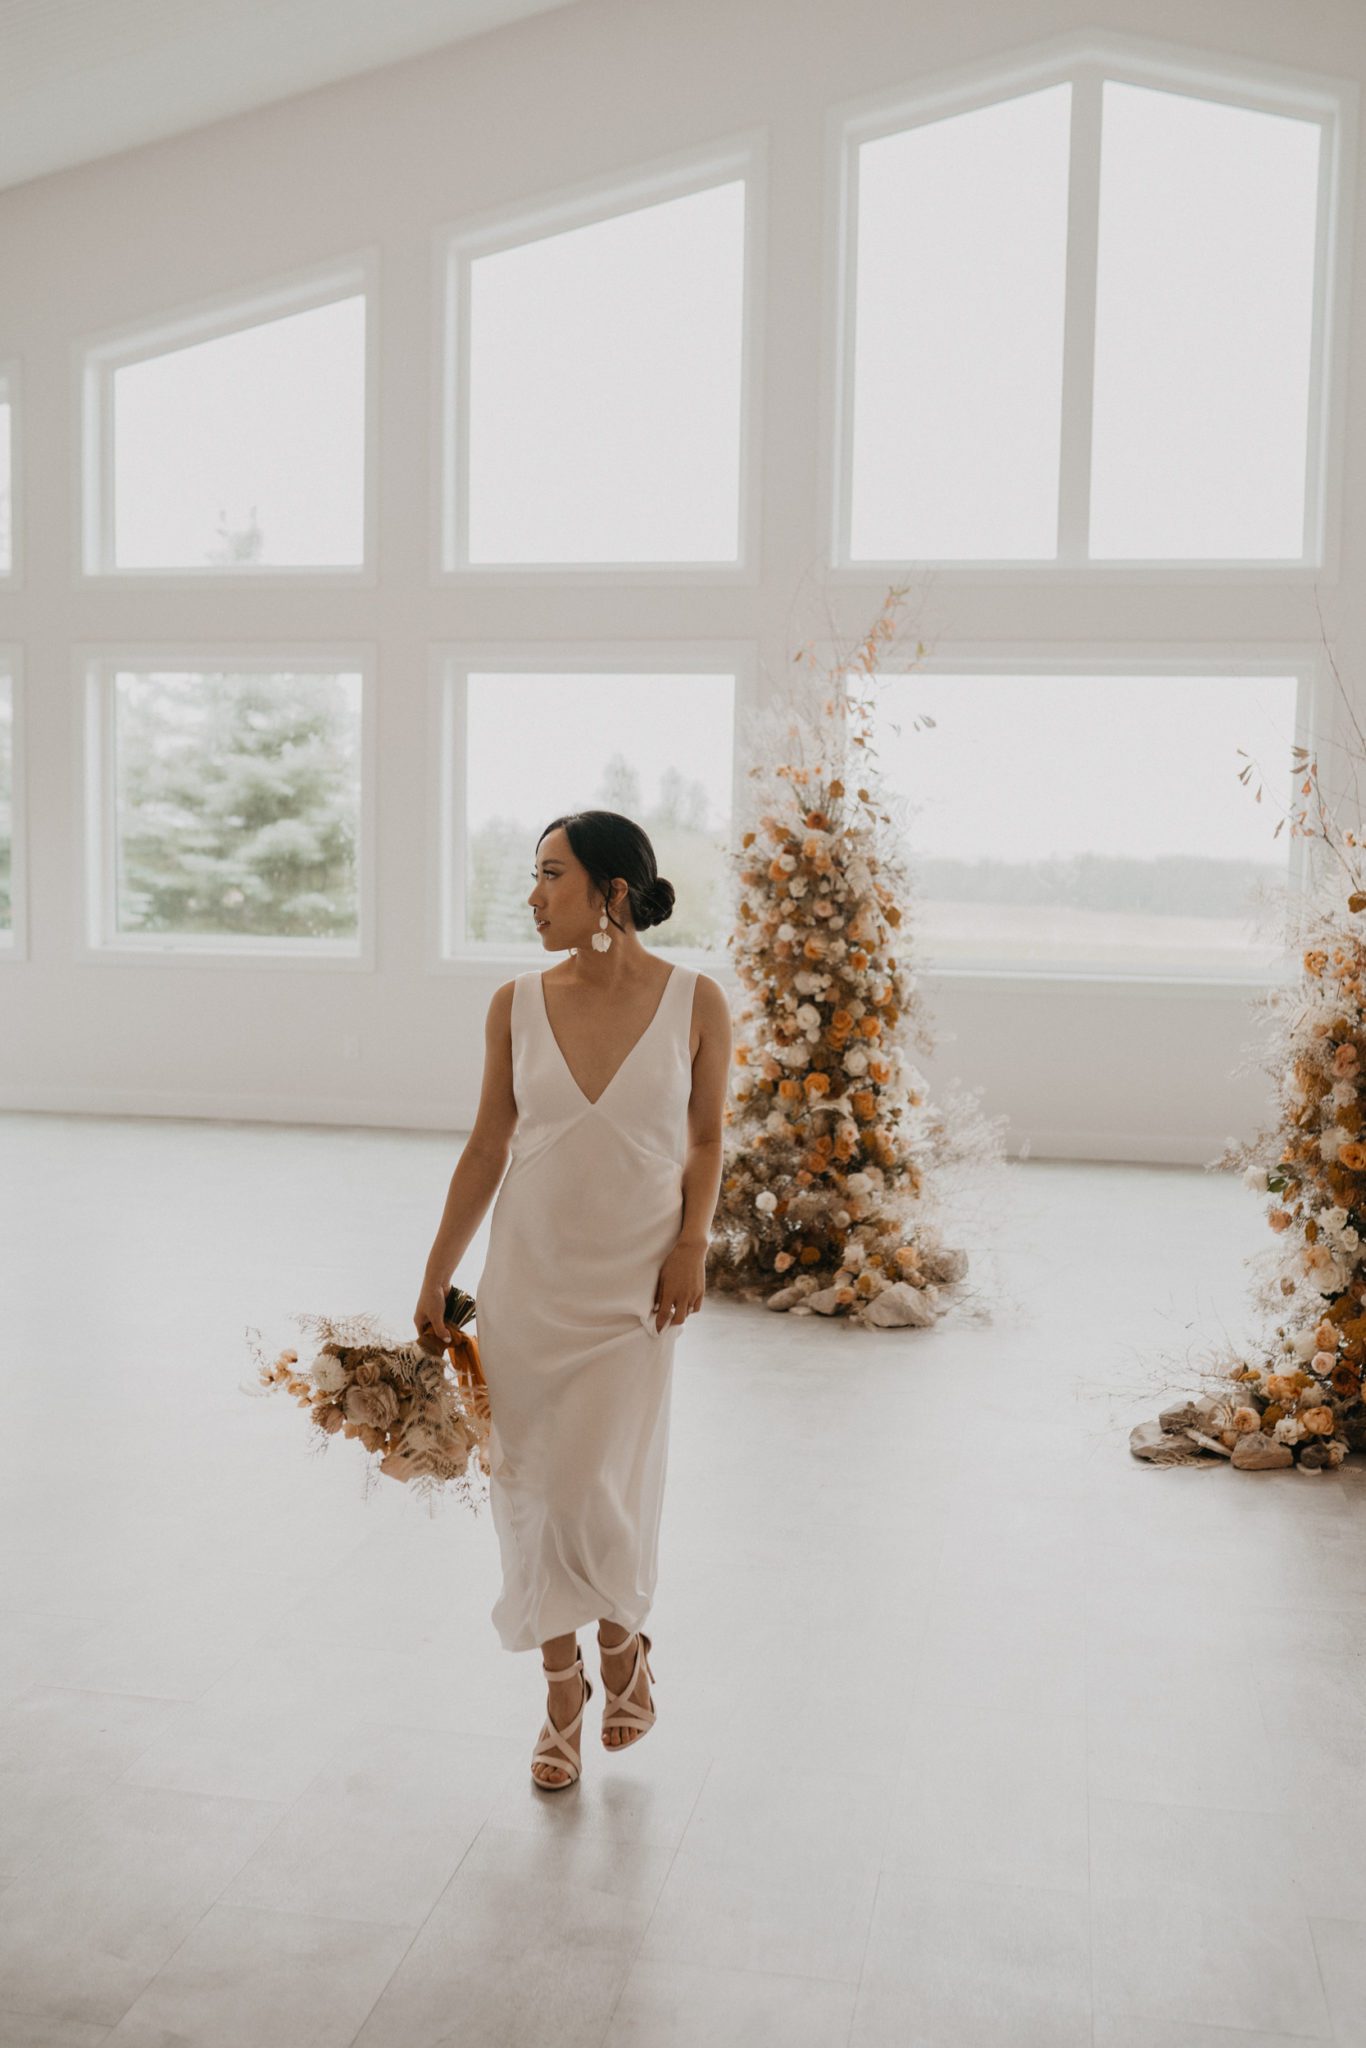 This Indoor Elopement Inspiration Brings The Outdoors Inside With A Boho Canopy Tent for Two